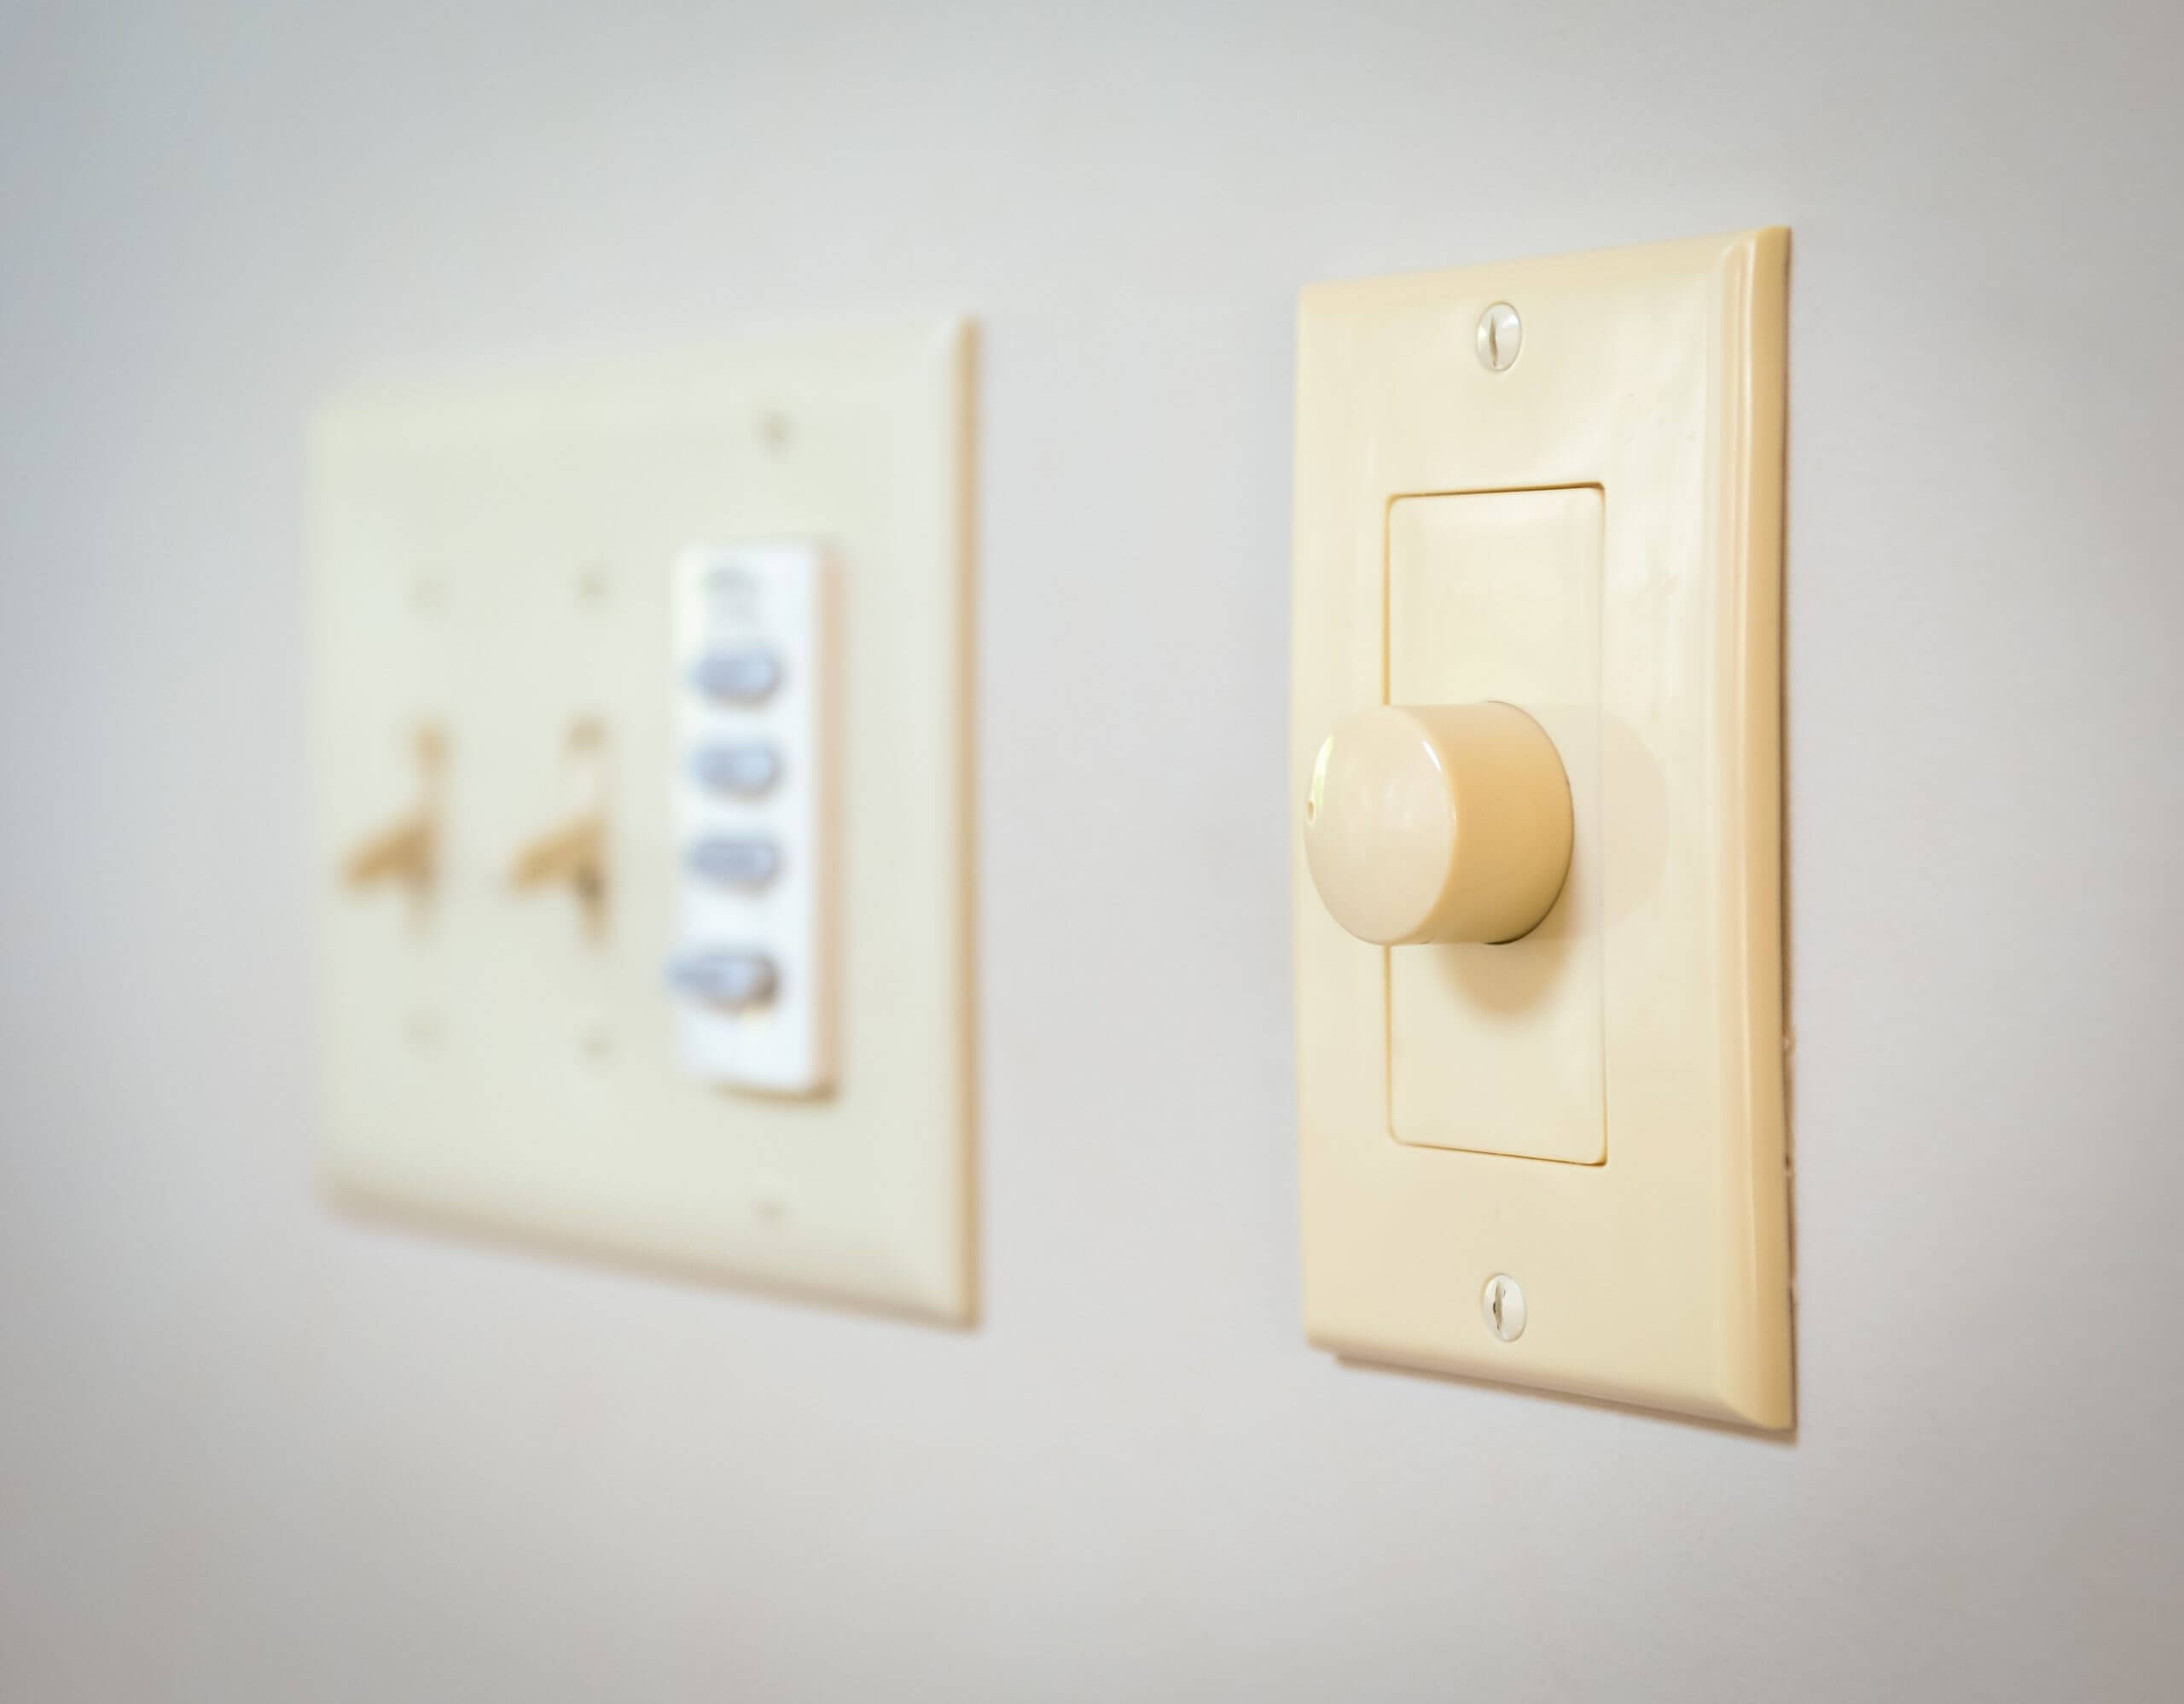 A focused view of a dimmer switch on a wall. Parallel to the dimmer switch is an unfocused view of a light switches.